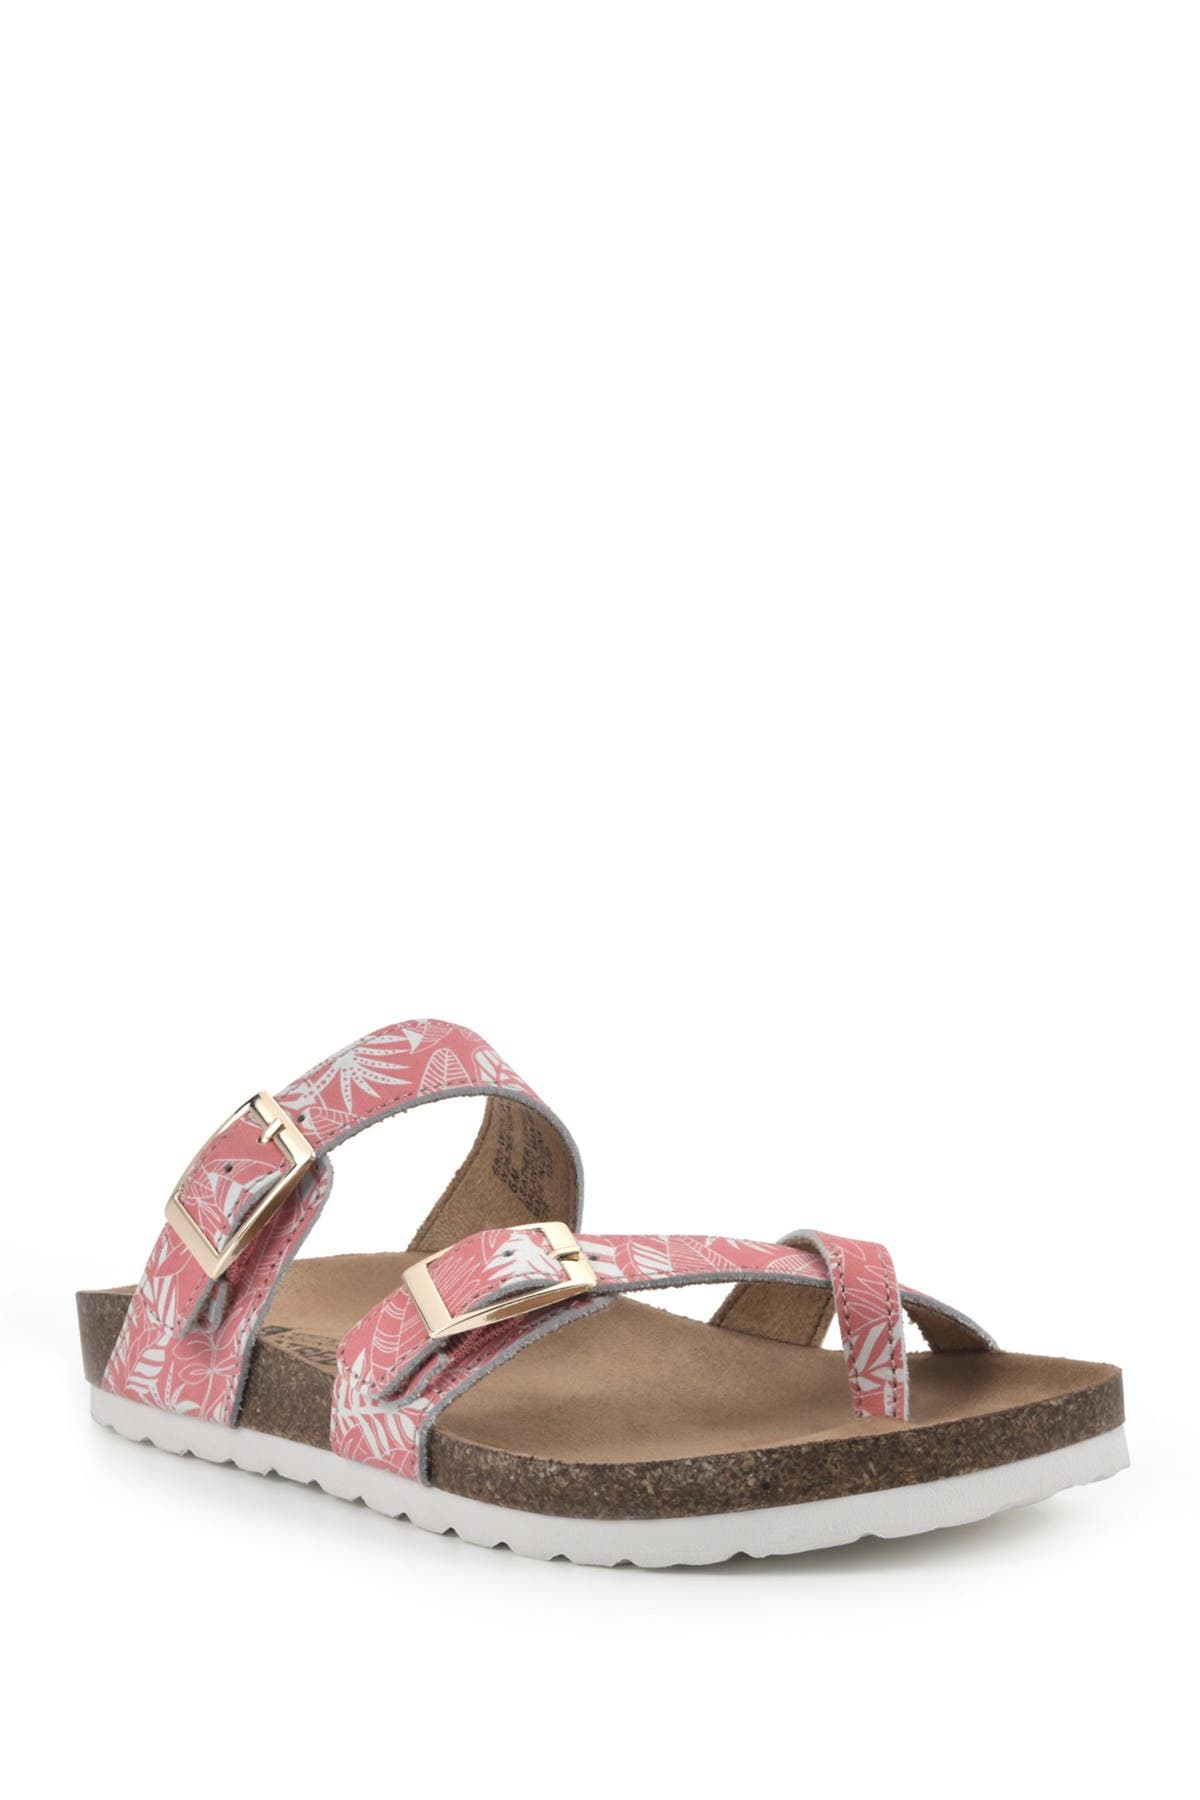 White Mountain Footwear Gracie Double Buckle Sandal In Coral/leather